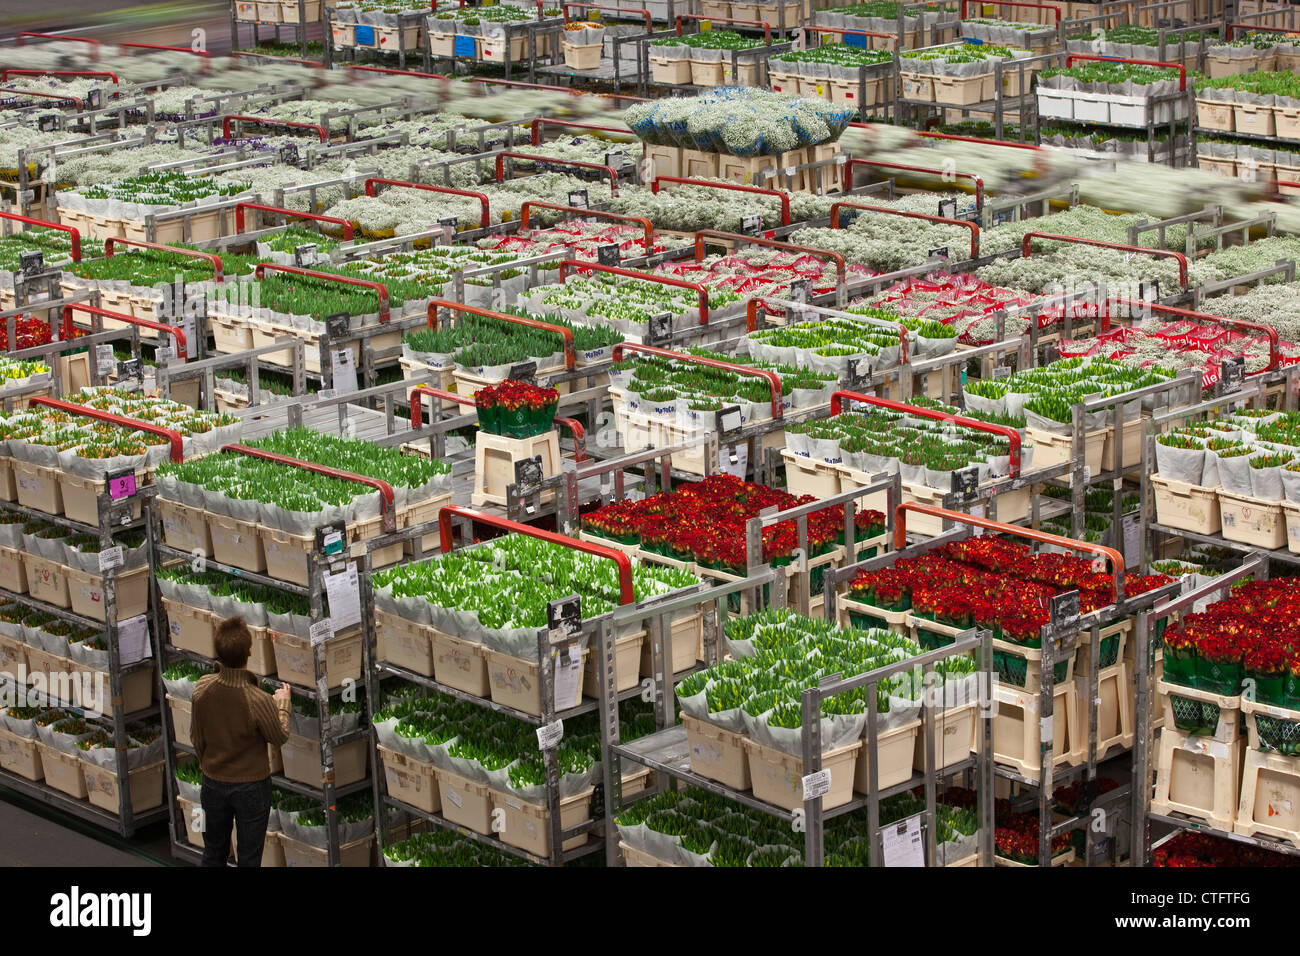 The Netherlands, Aalsmeer, FloraHolland, largest flower auction in the world. Stock Photo